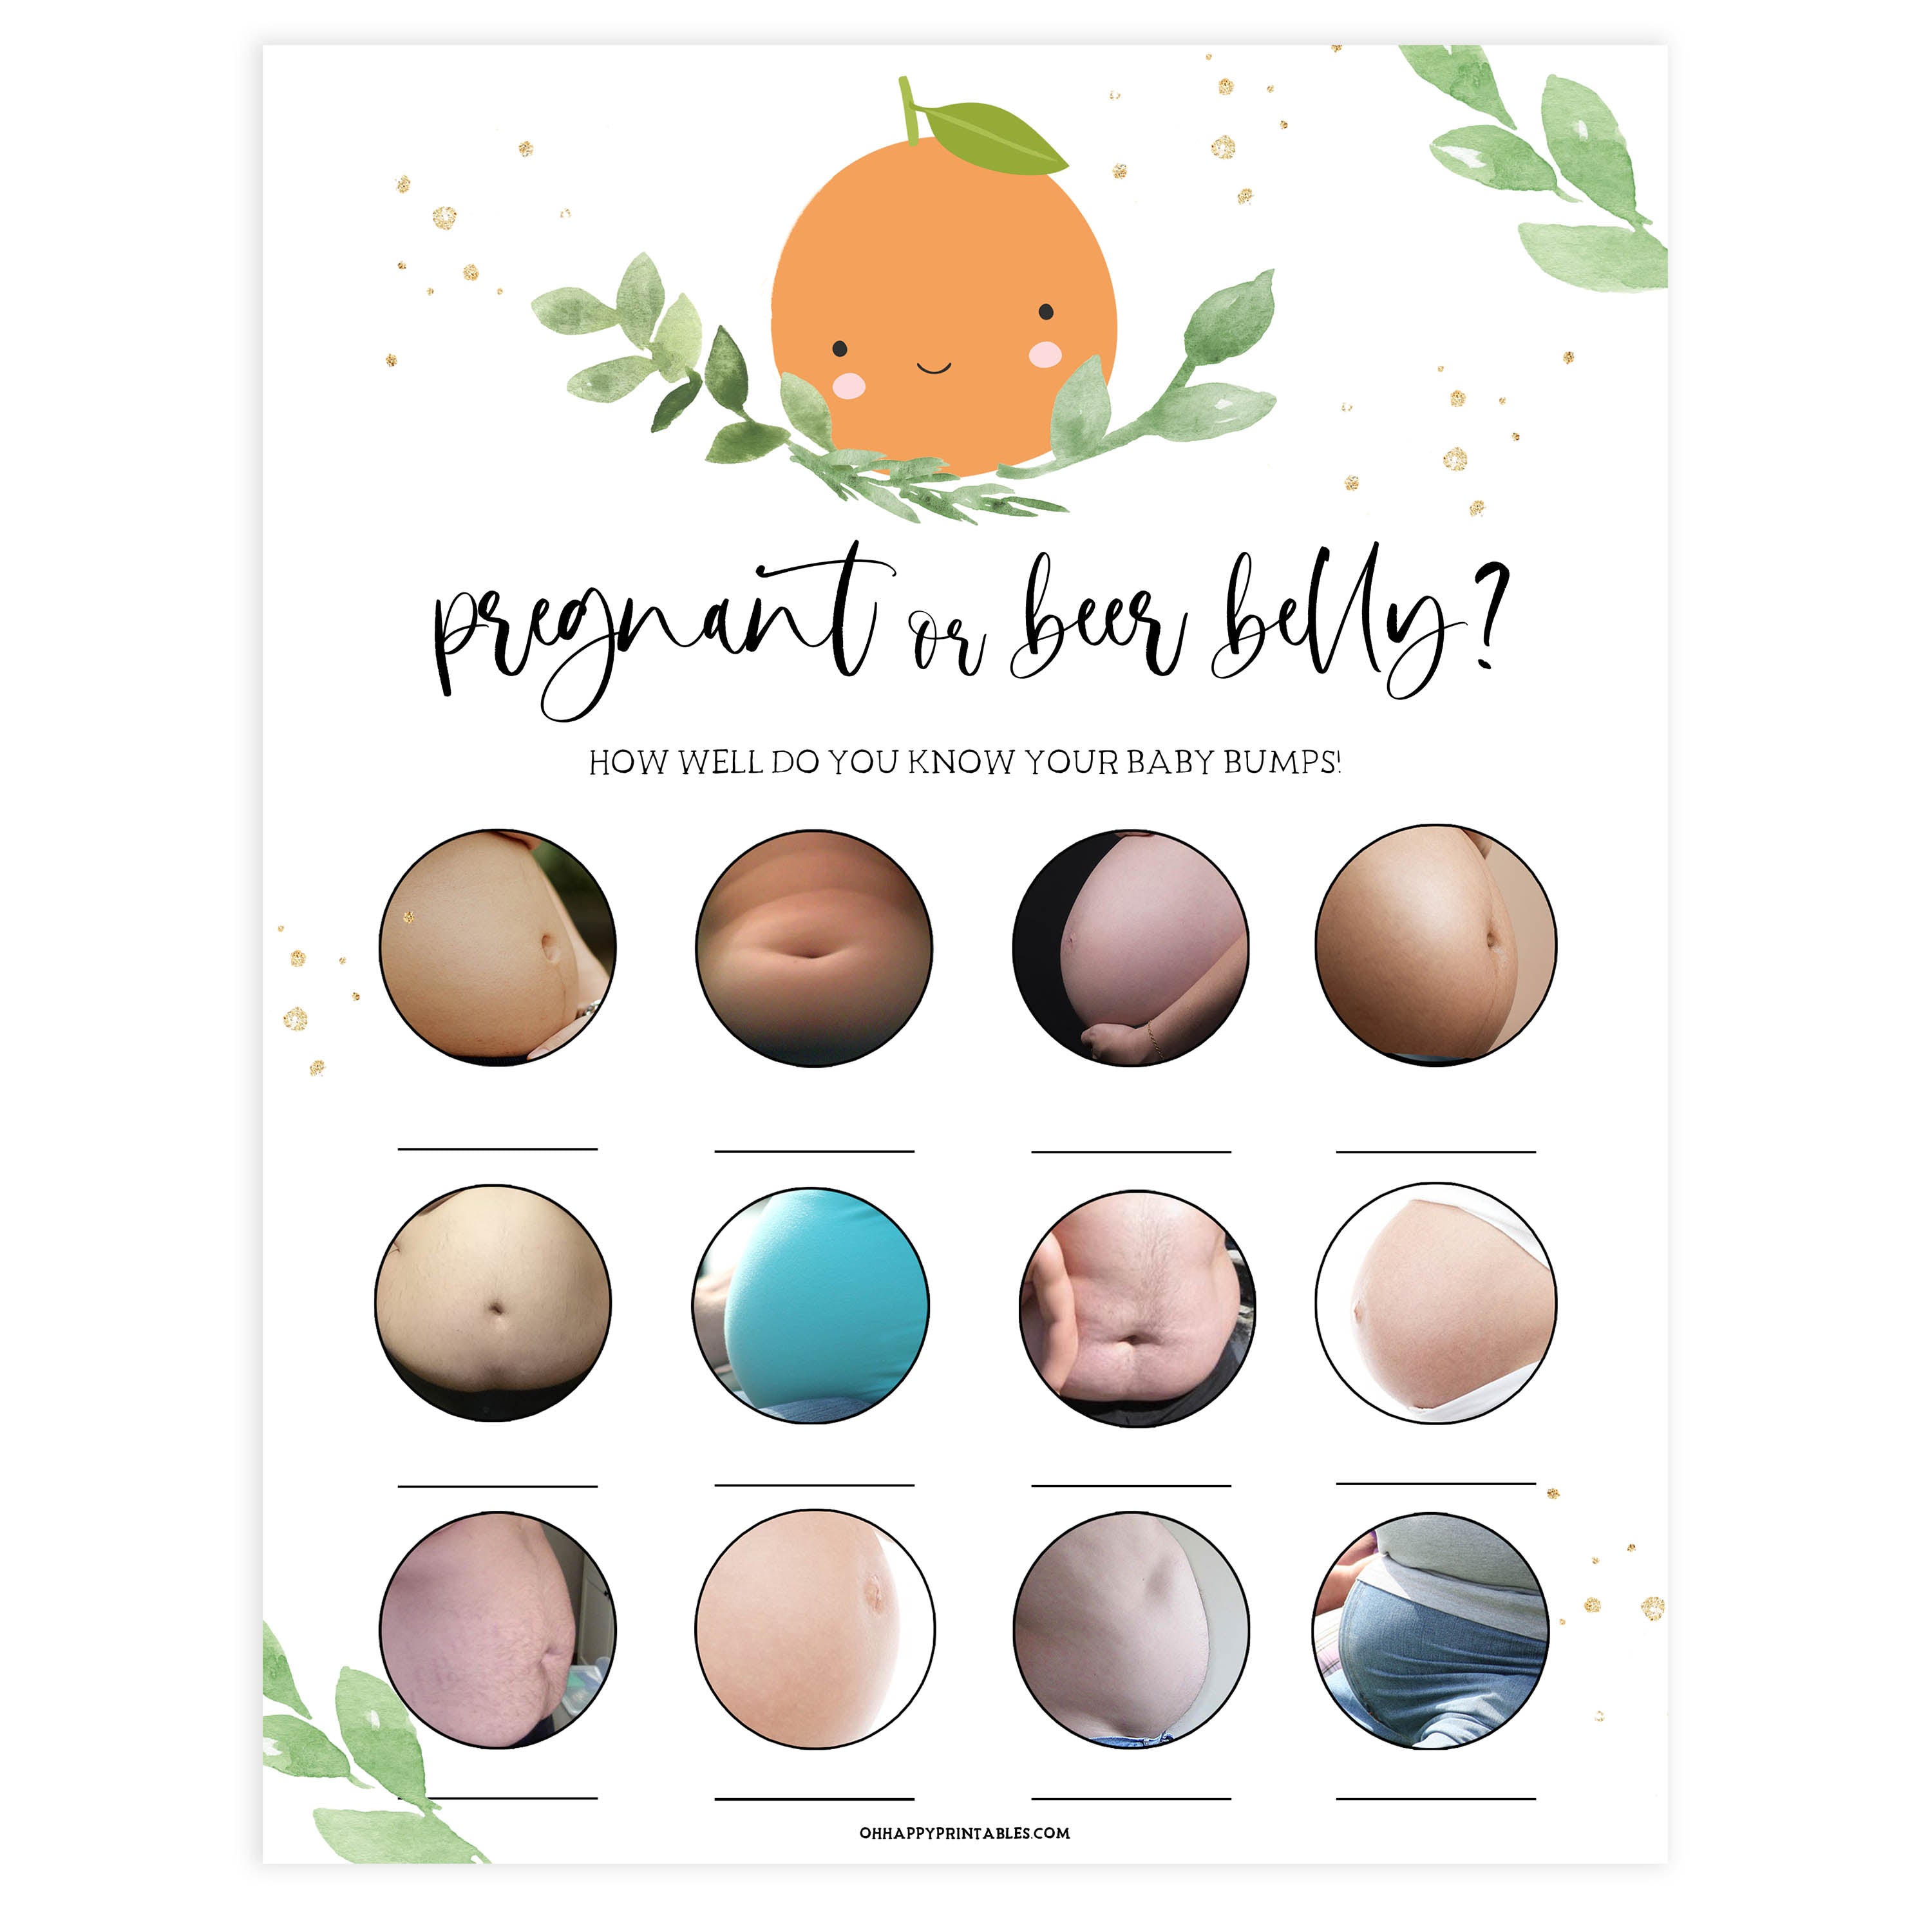 pregnant or beer belly baby games, baby bump or beer belly game, Printable baby shower games, little cutie baby games, baby shower games, fun baby shower ideas, top baby shower ideas, little cutie baby shower, baby shower games, fun little cutie baby shower ideas